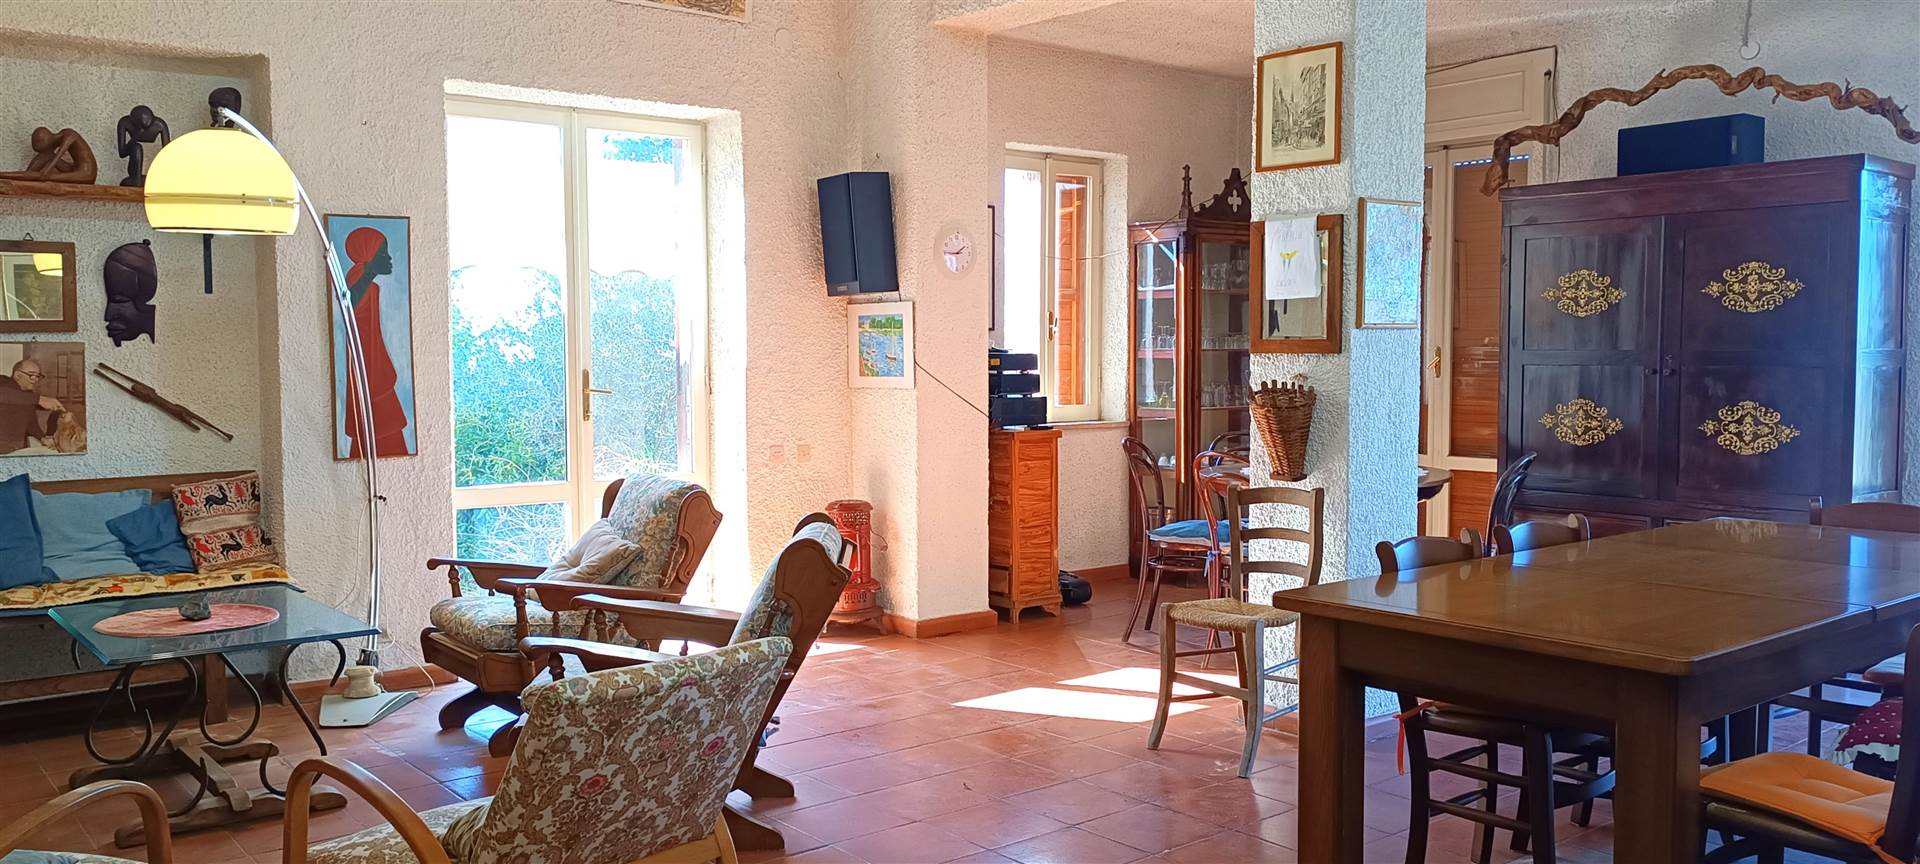 COLLEVECCHIO, Detached apartment for sale of 263 Sq. mt., Excellent Condition, Heating Individual heating system, Energetic class: G, composed by: 5.